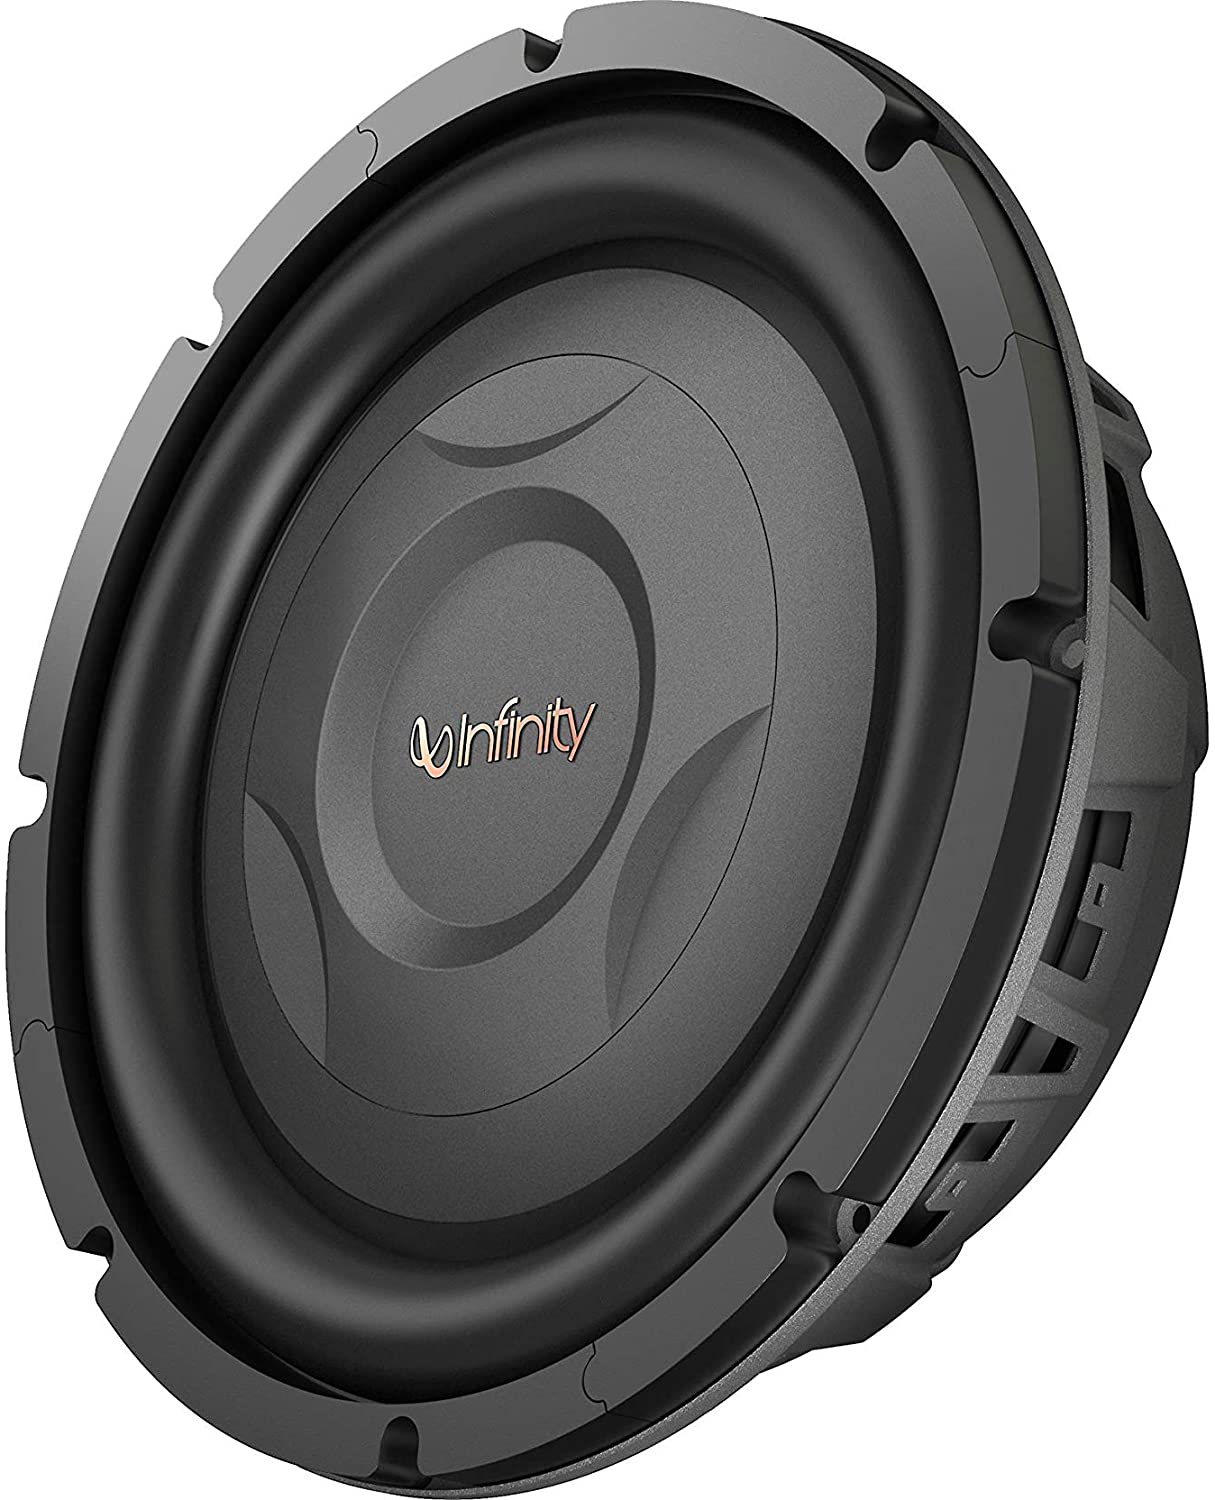 Infinity REF1000S Shallow Mount Subwoofer Best Shallow Mount 10 inch Subwoofer